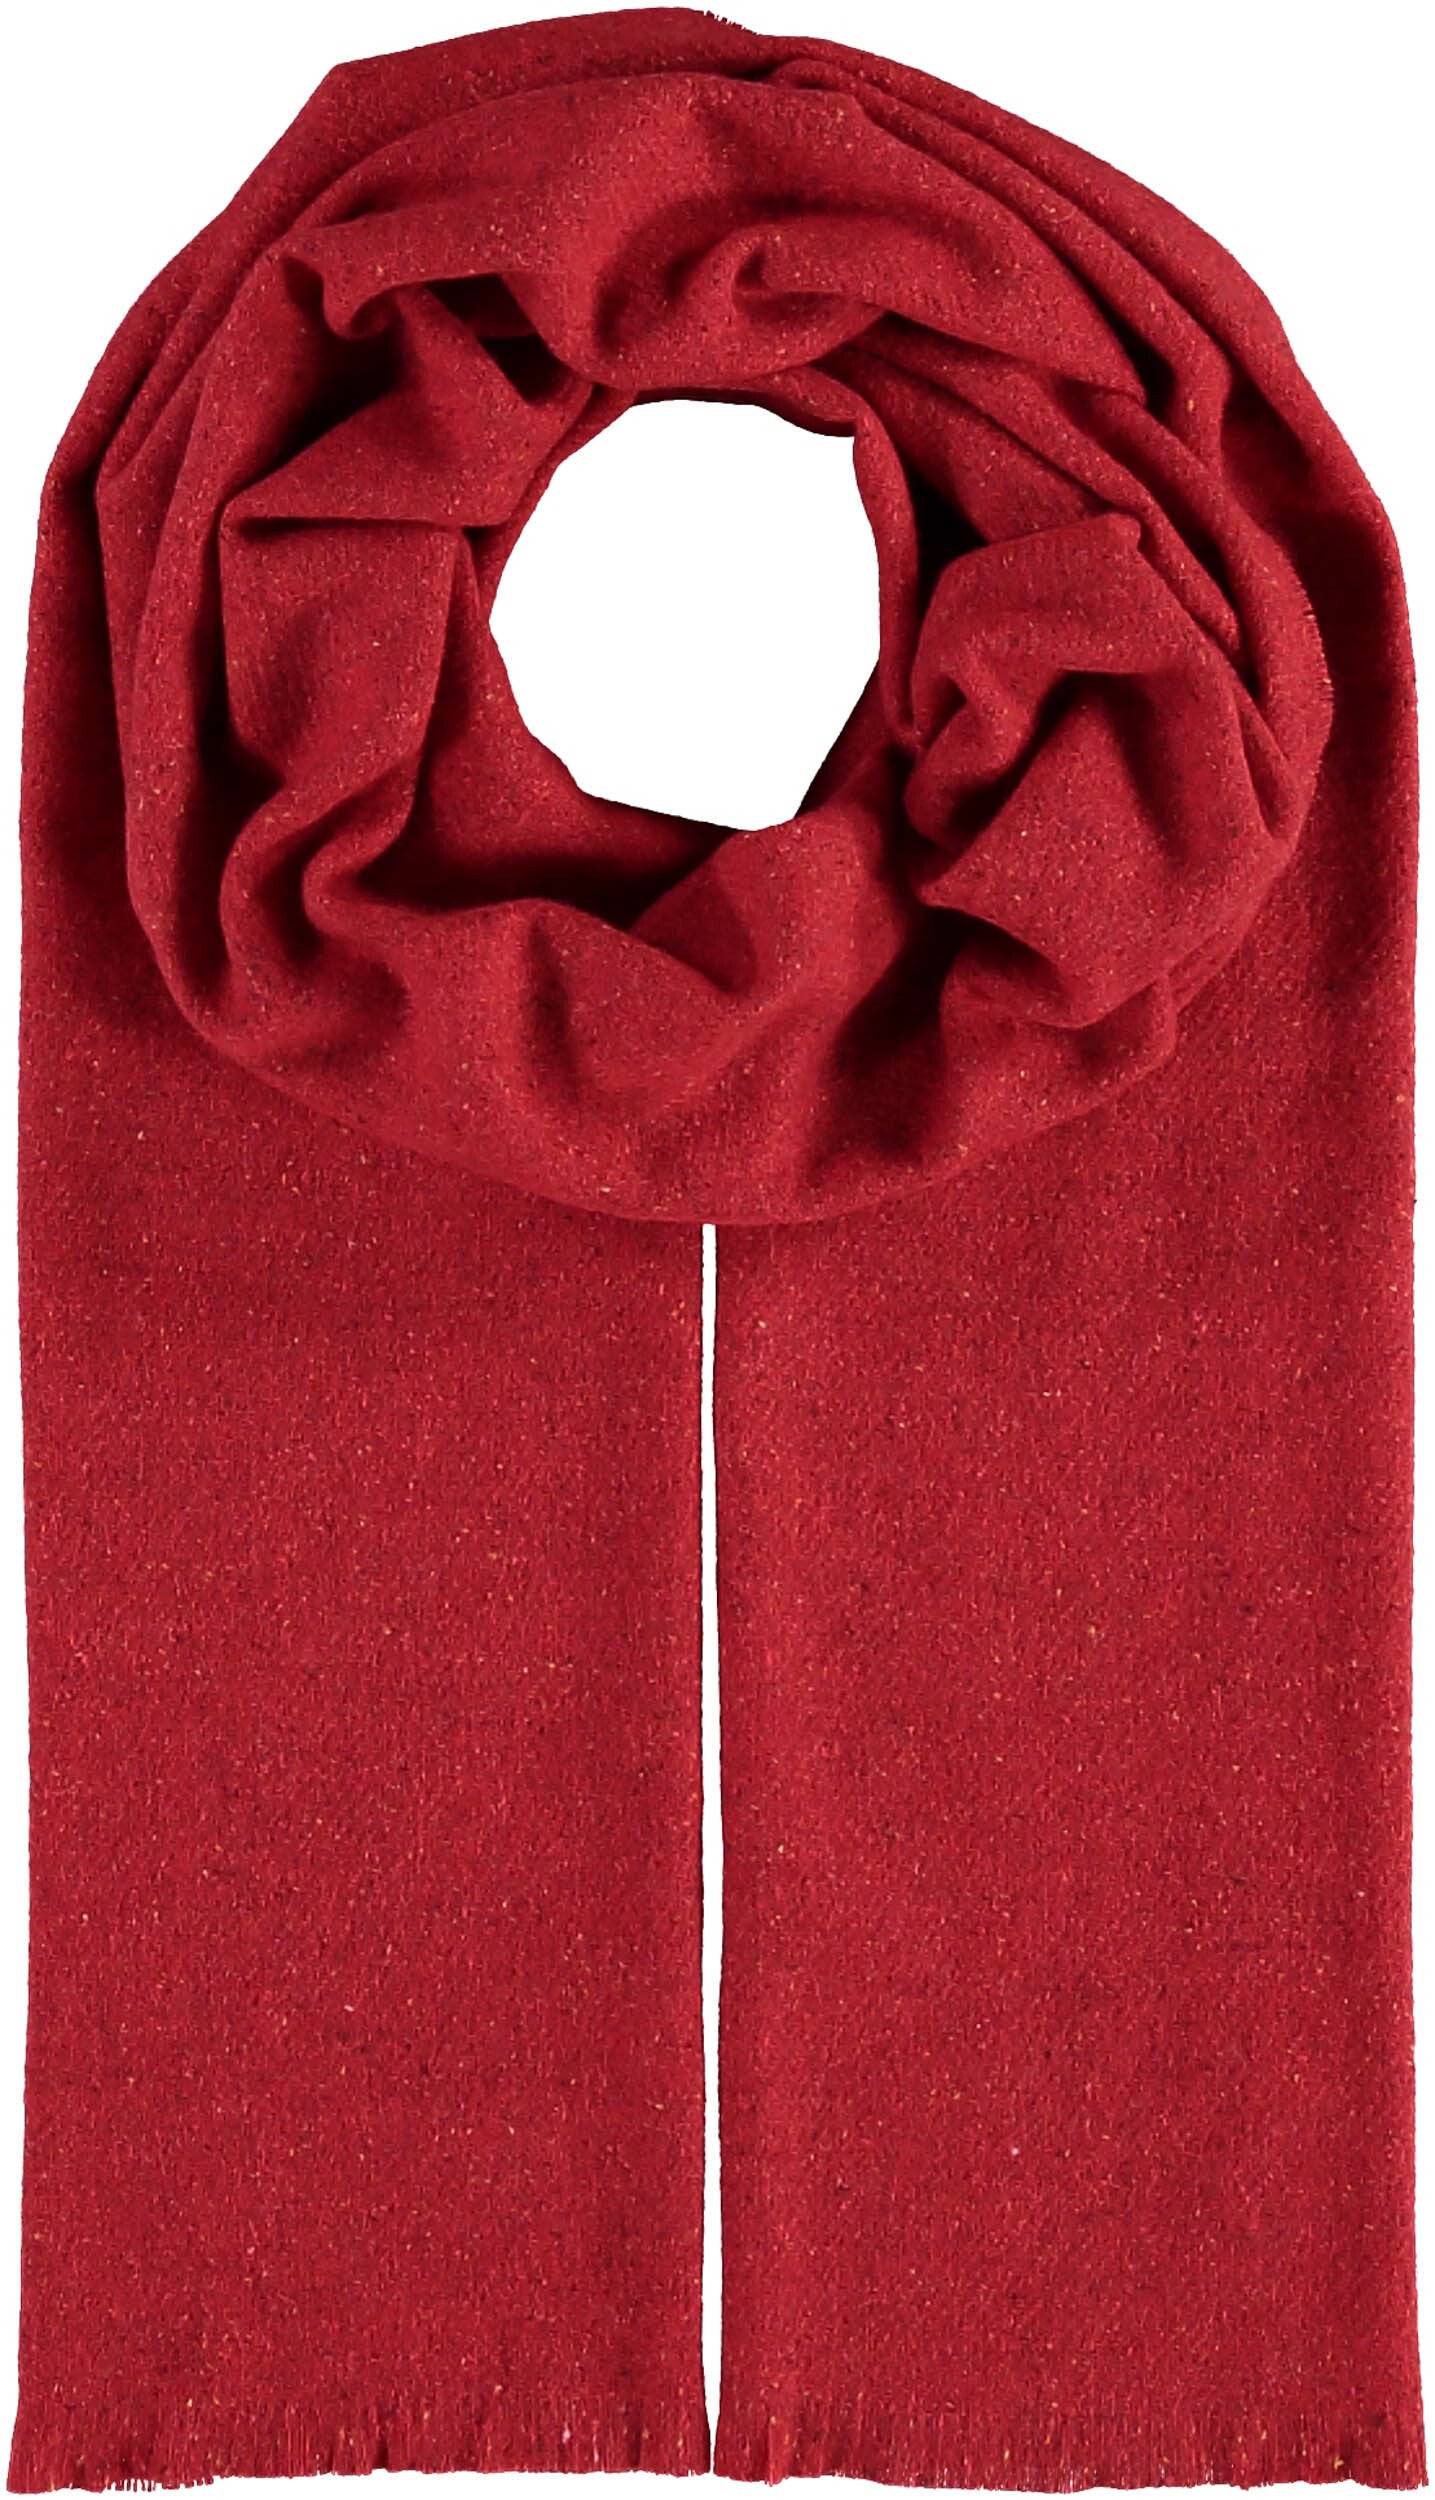 Cashmink®scarf in red by Fraas